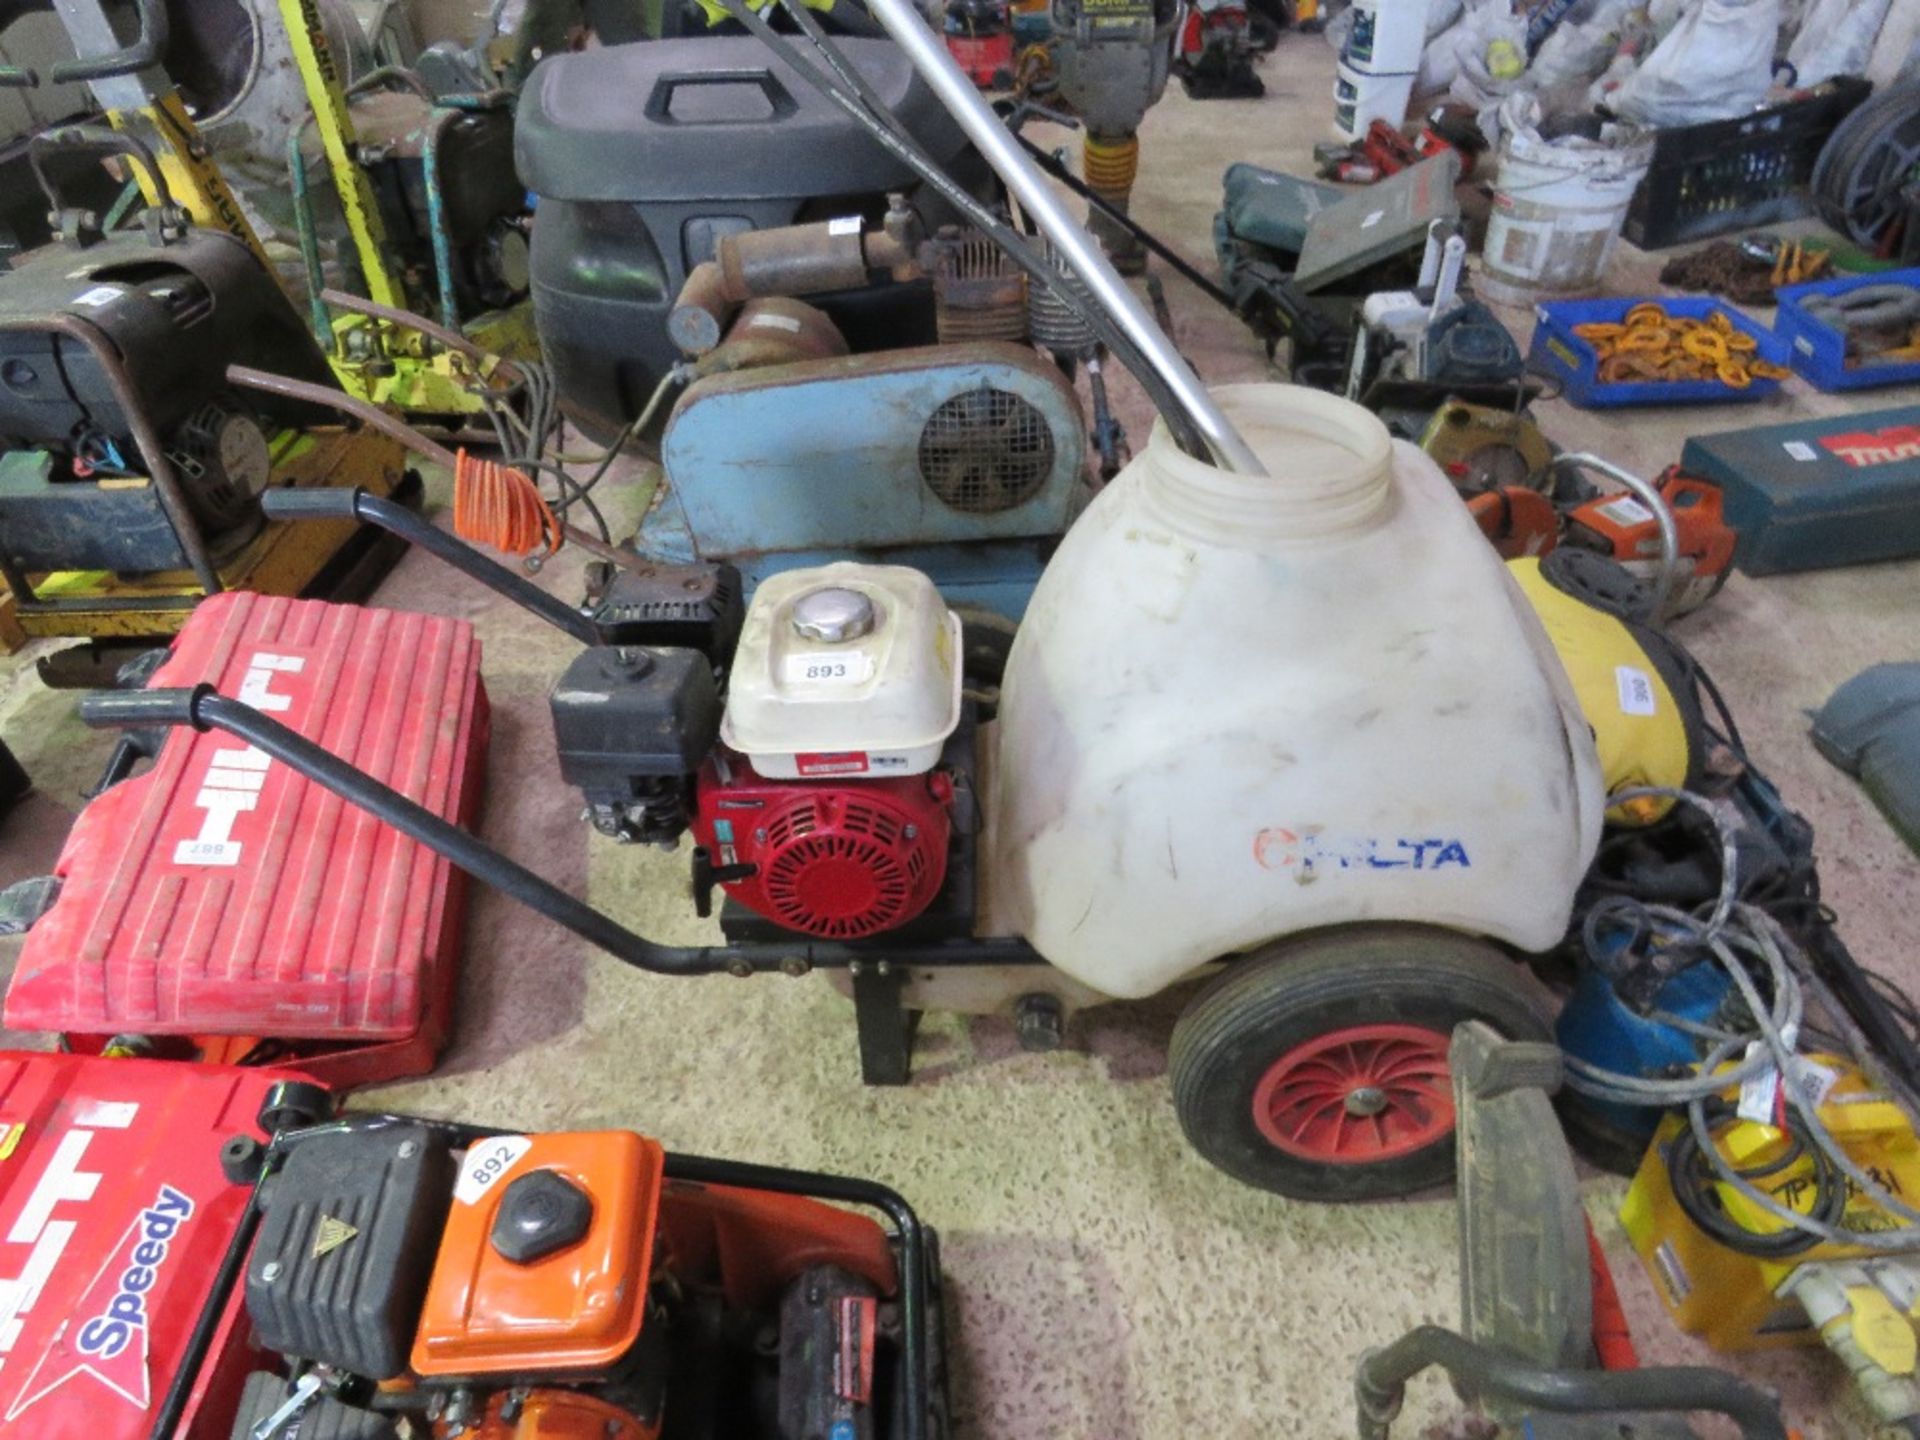 HILTA HONDA ENGINED PRESSURE WASHER BOWSER BARROW WITH EXTRA LONG LANCE. - Image 2 of 9